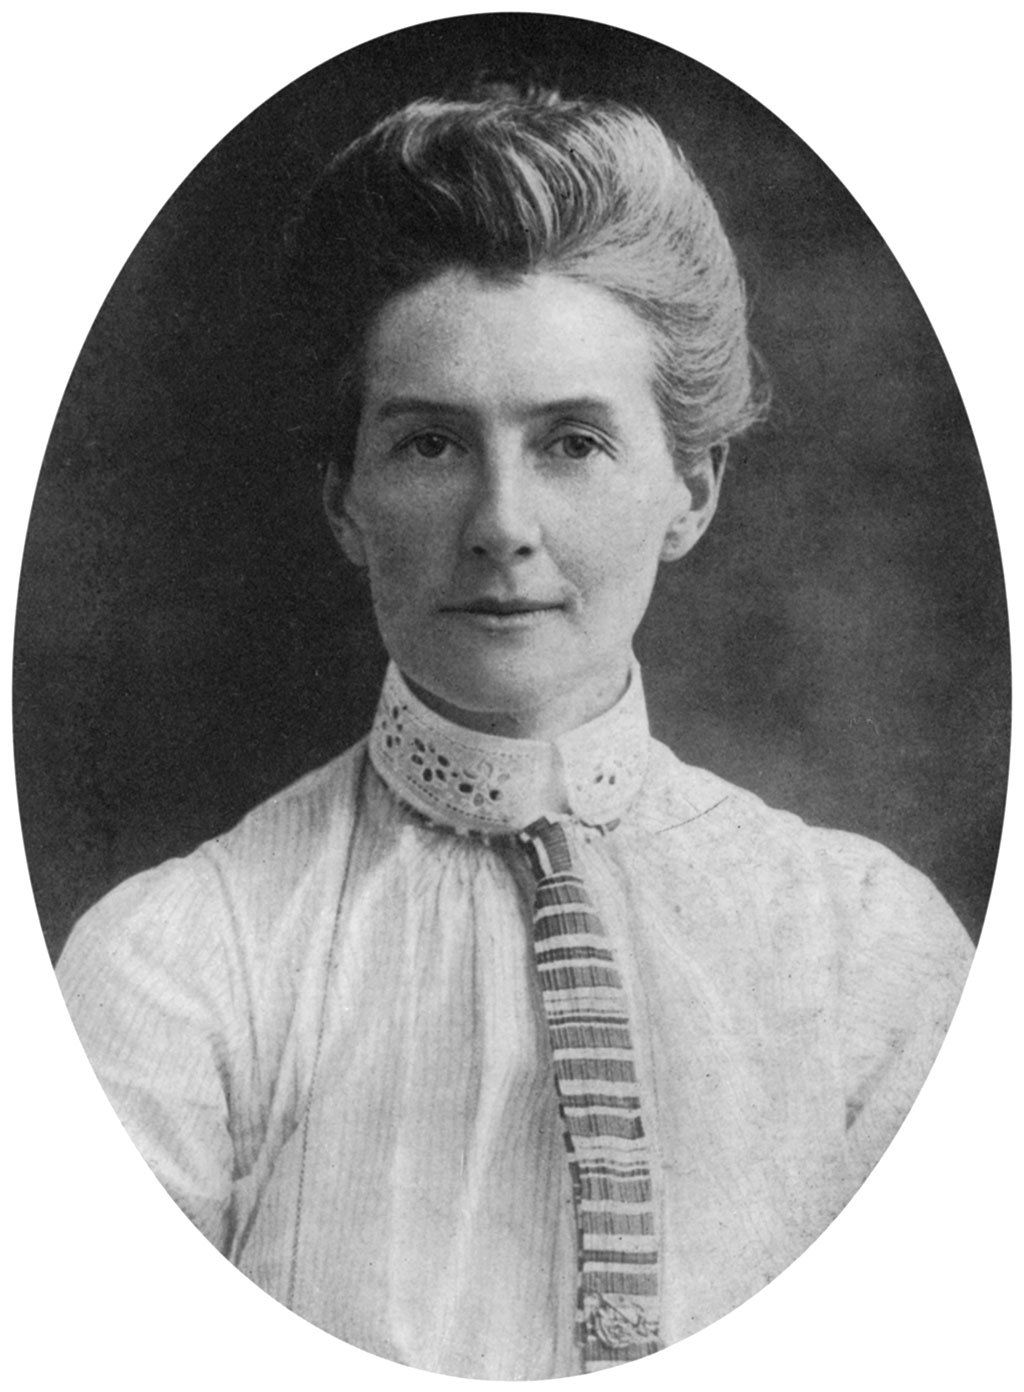 A black and white bust photograph of Edith Cavell